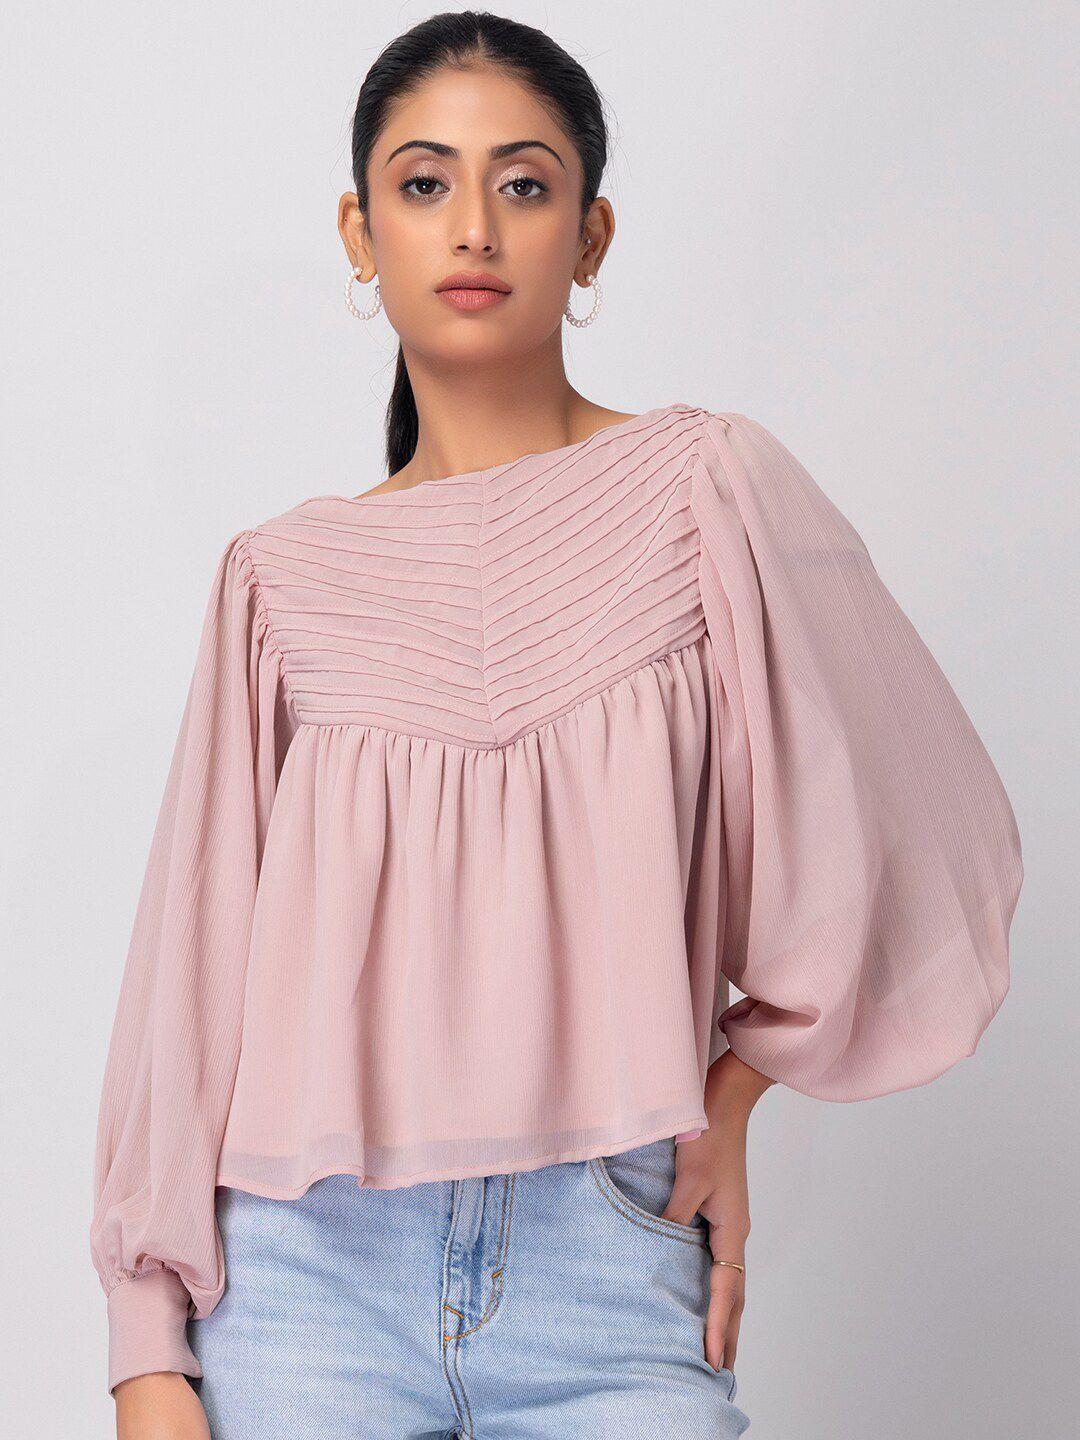 faballey-pink-boat-neck-puff-sleeves-pleated-empire-top